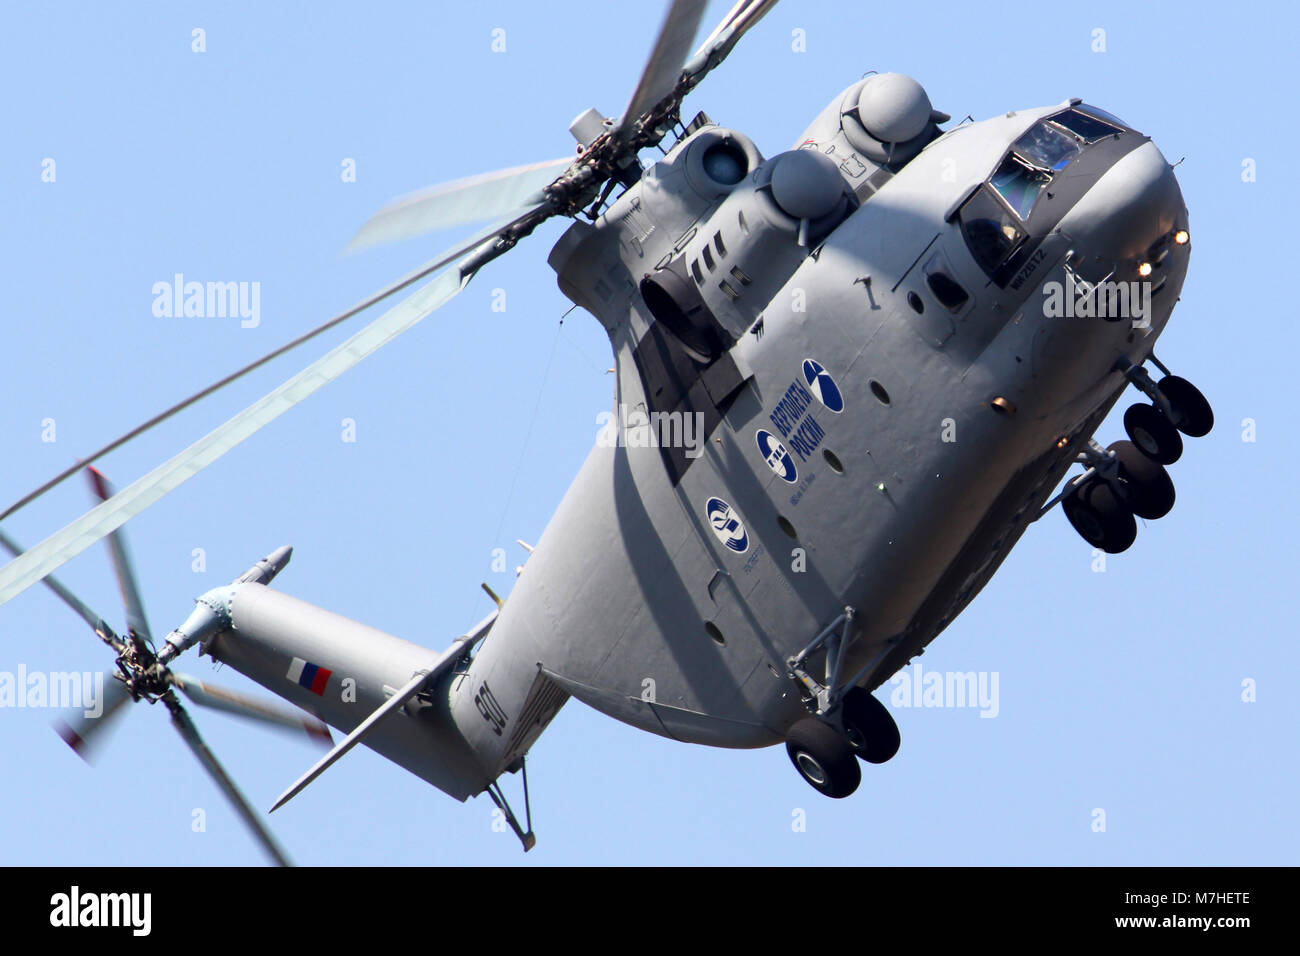 Mil Mi-26T2 heavy transport helicopter of the Russian Air Force. Stock Photo